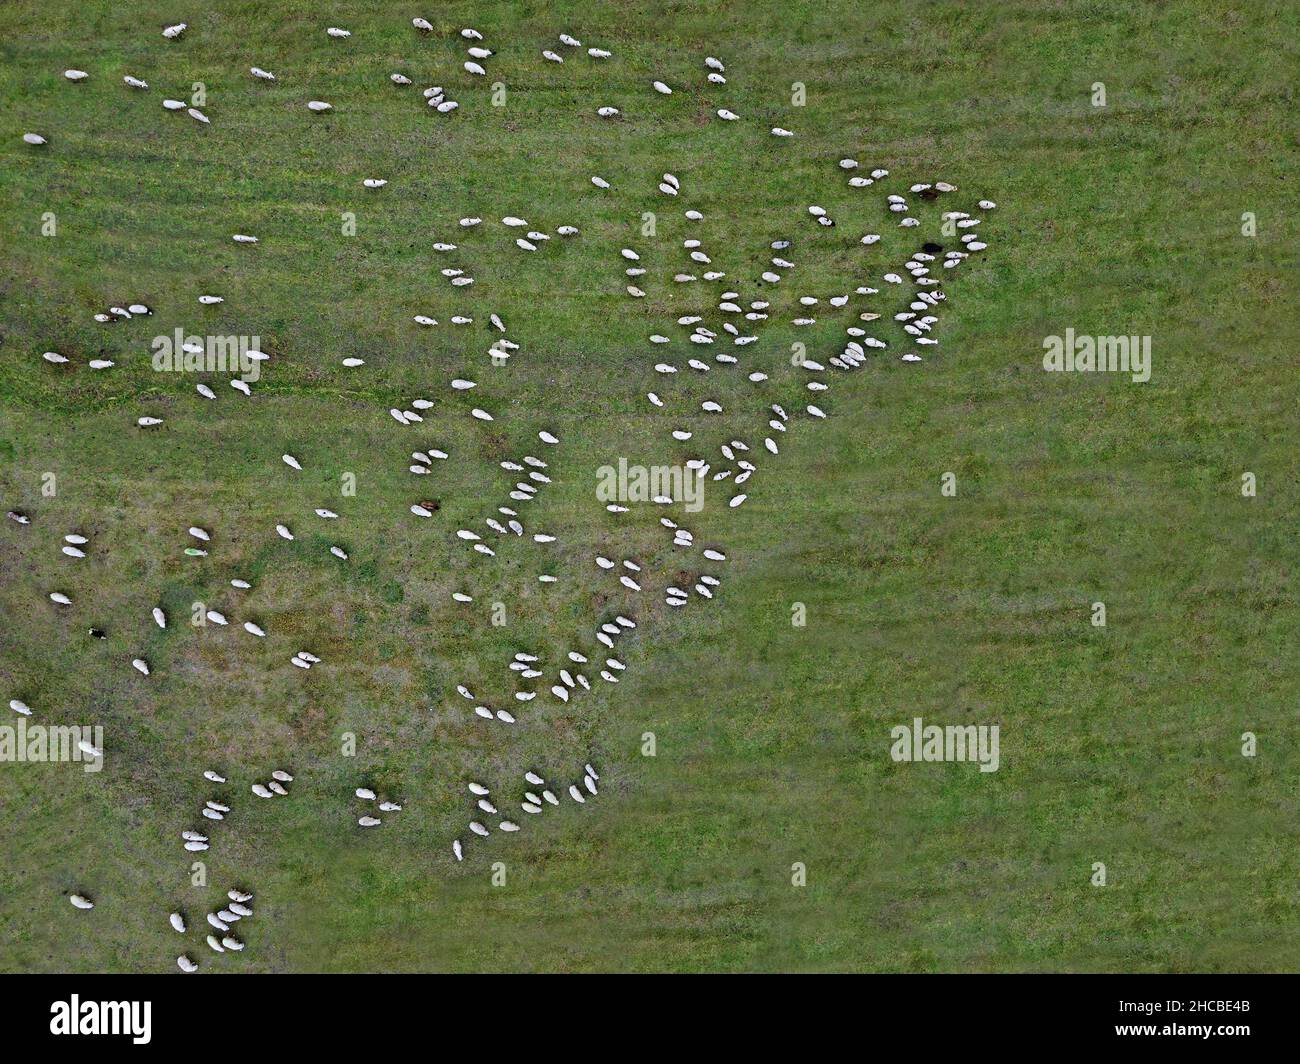 Aerial view of flock of sheep grazing in green pasture Stock Photo